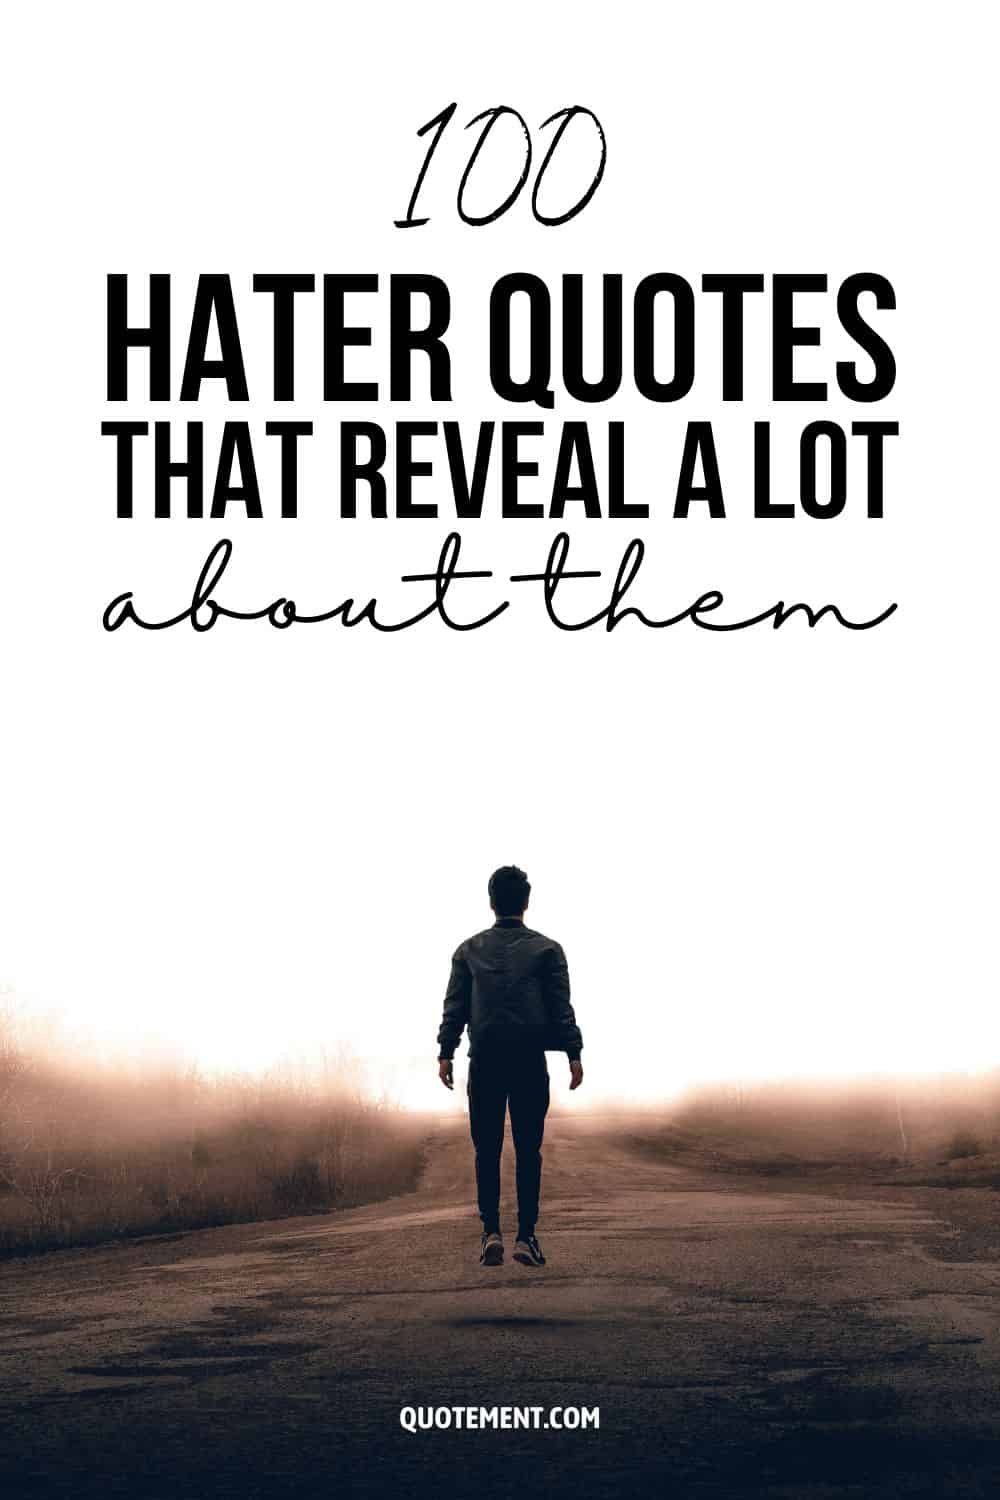 100 Hater Quotes That Reveal A Lot About Them